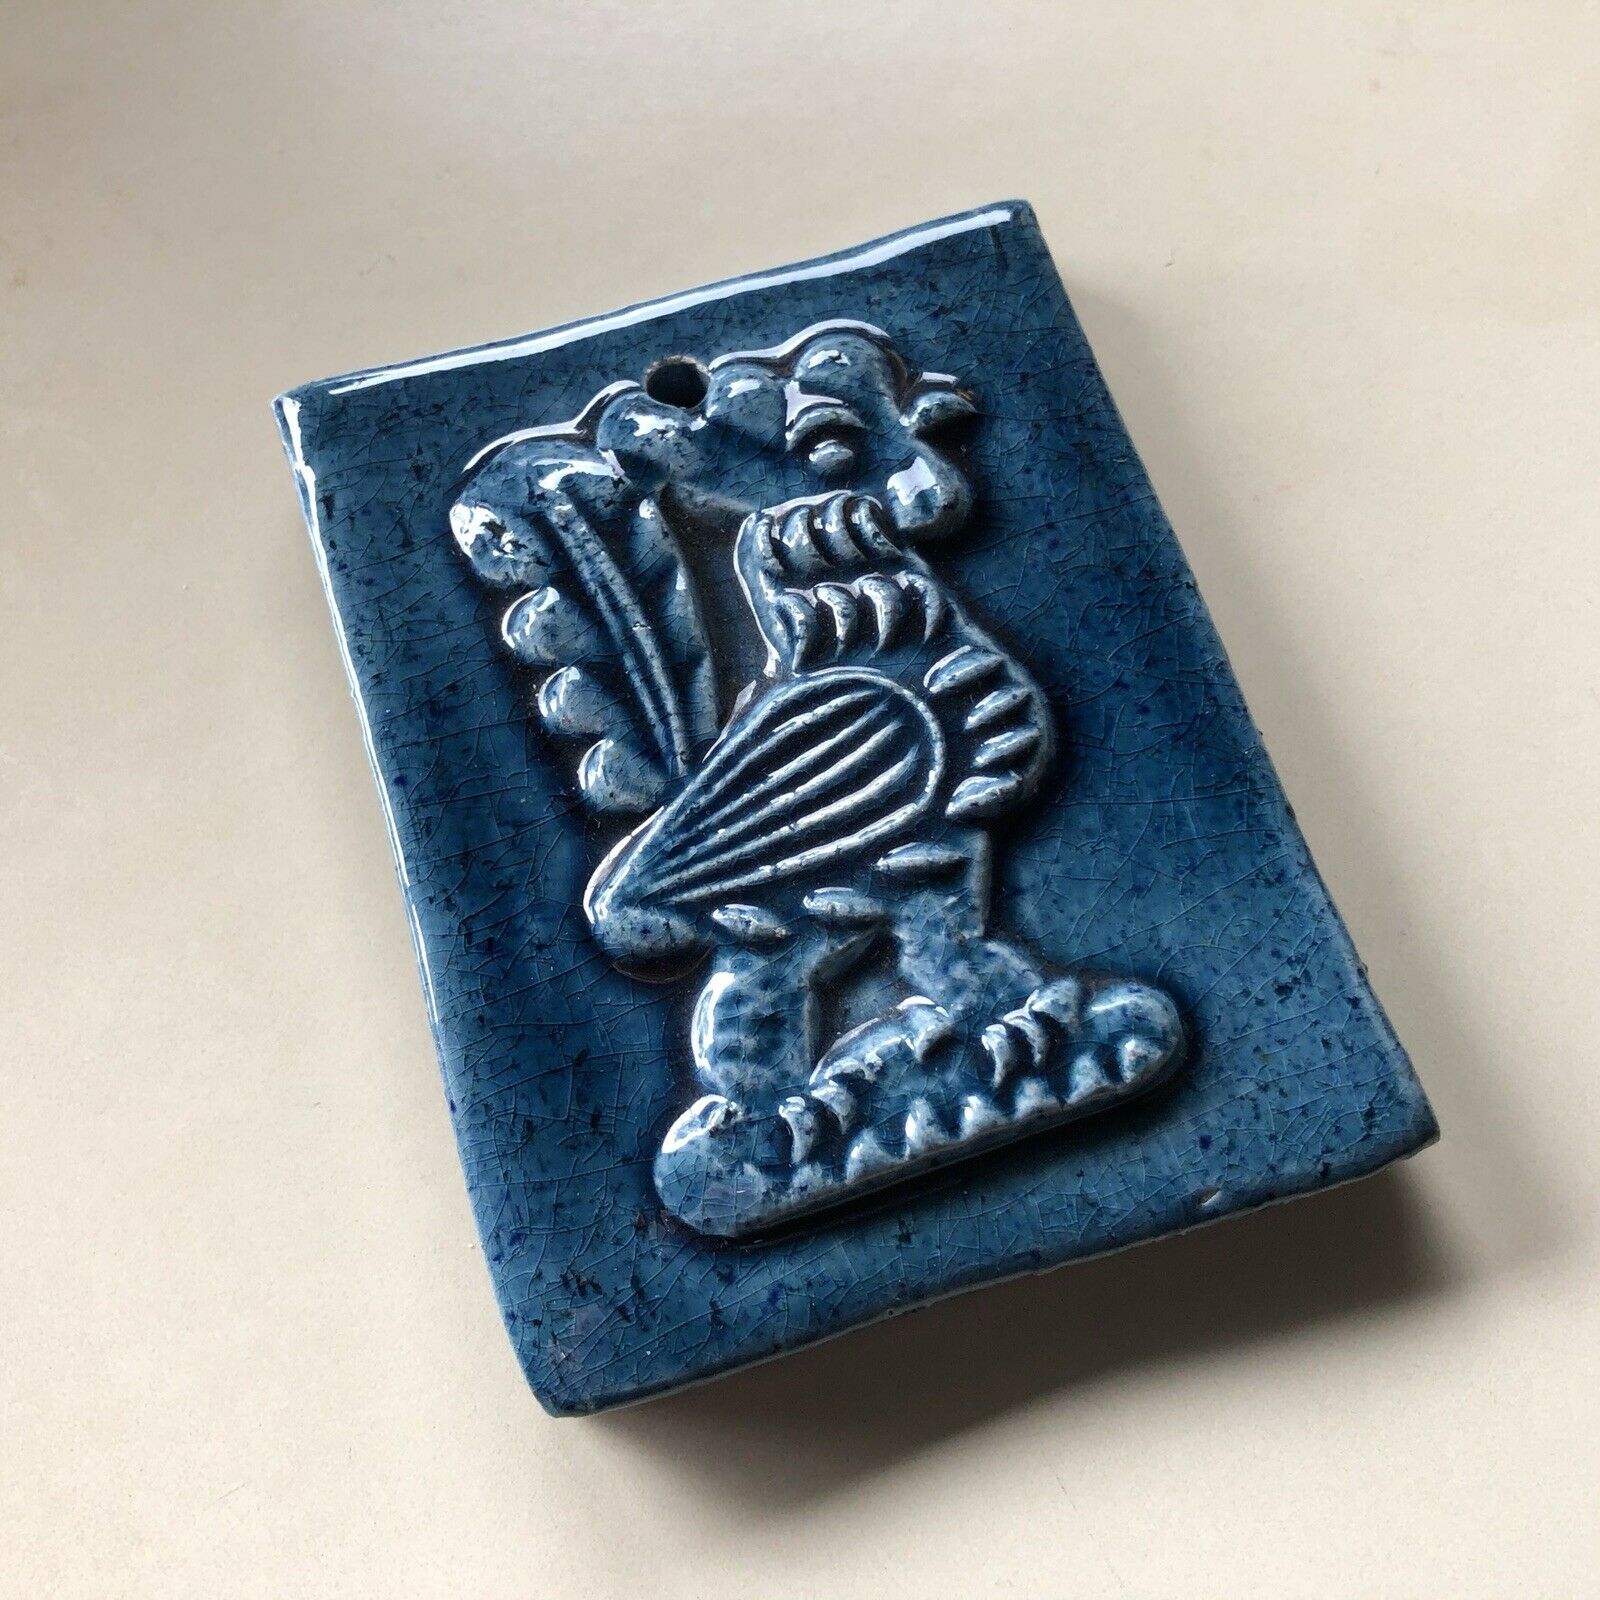 Pottemagerstuen Denmark Pottery Stoneware Blue Glaze Rooster Small Wall Tile